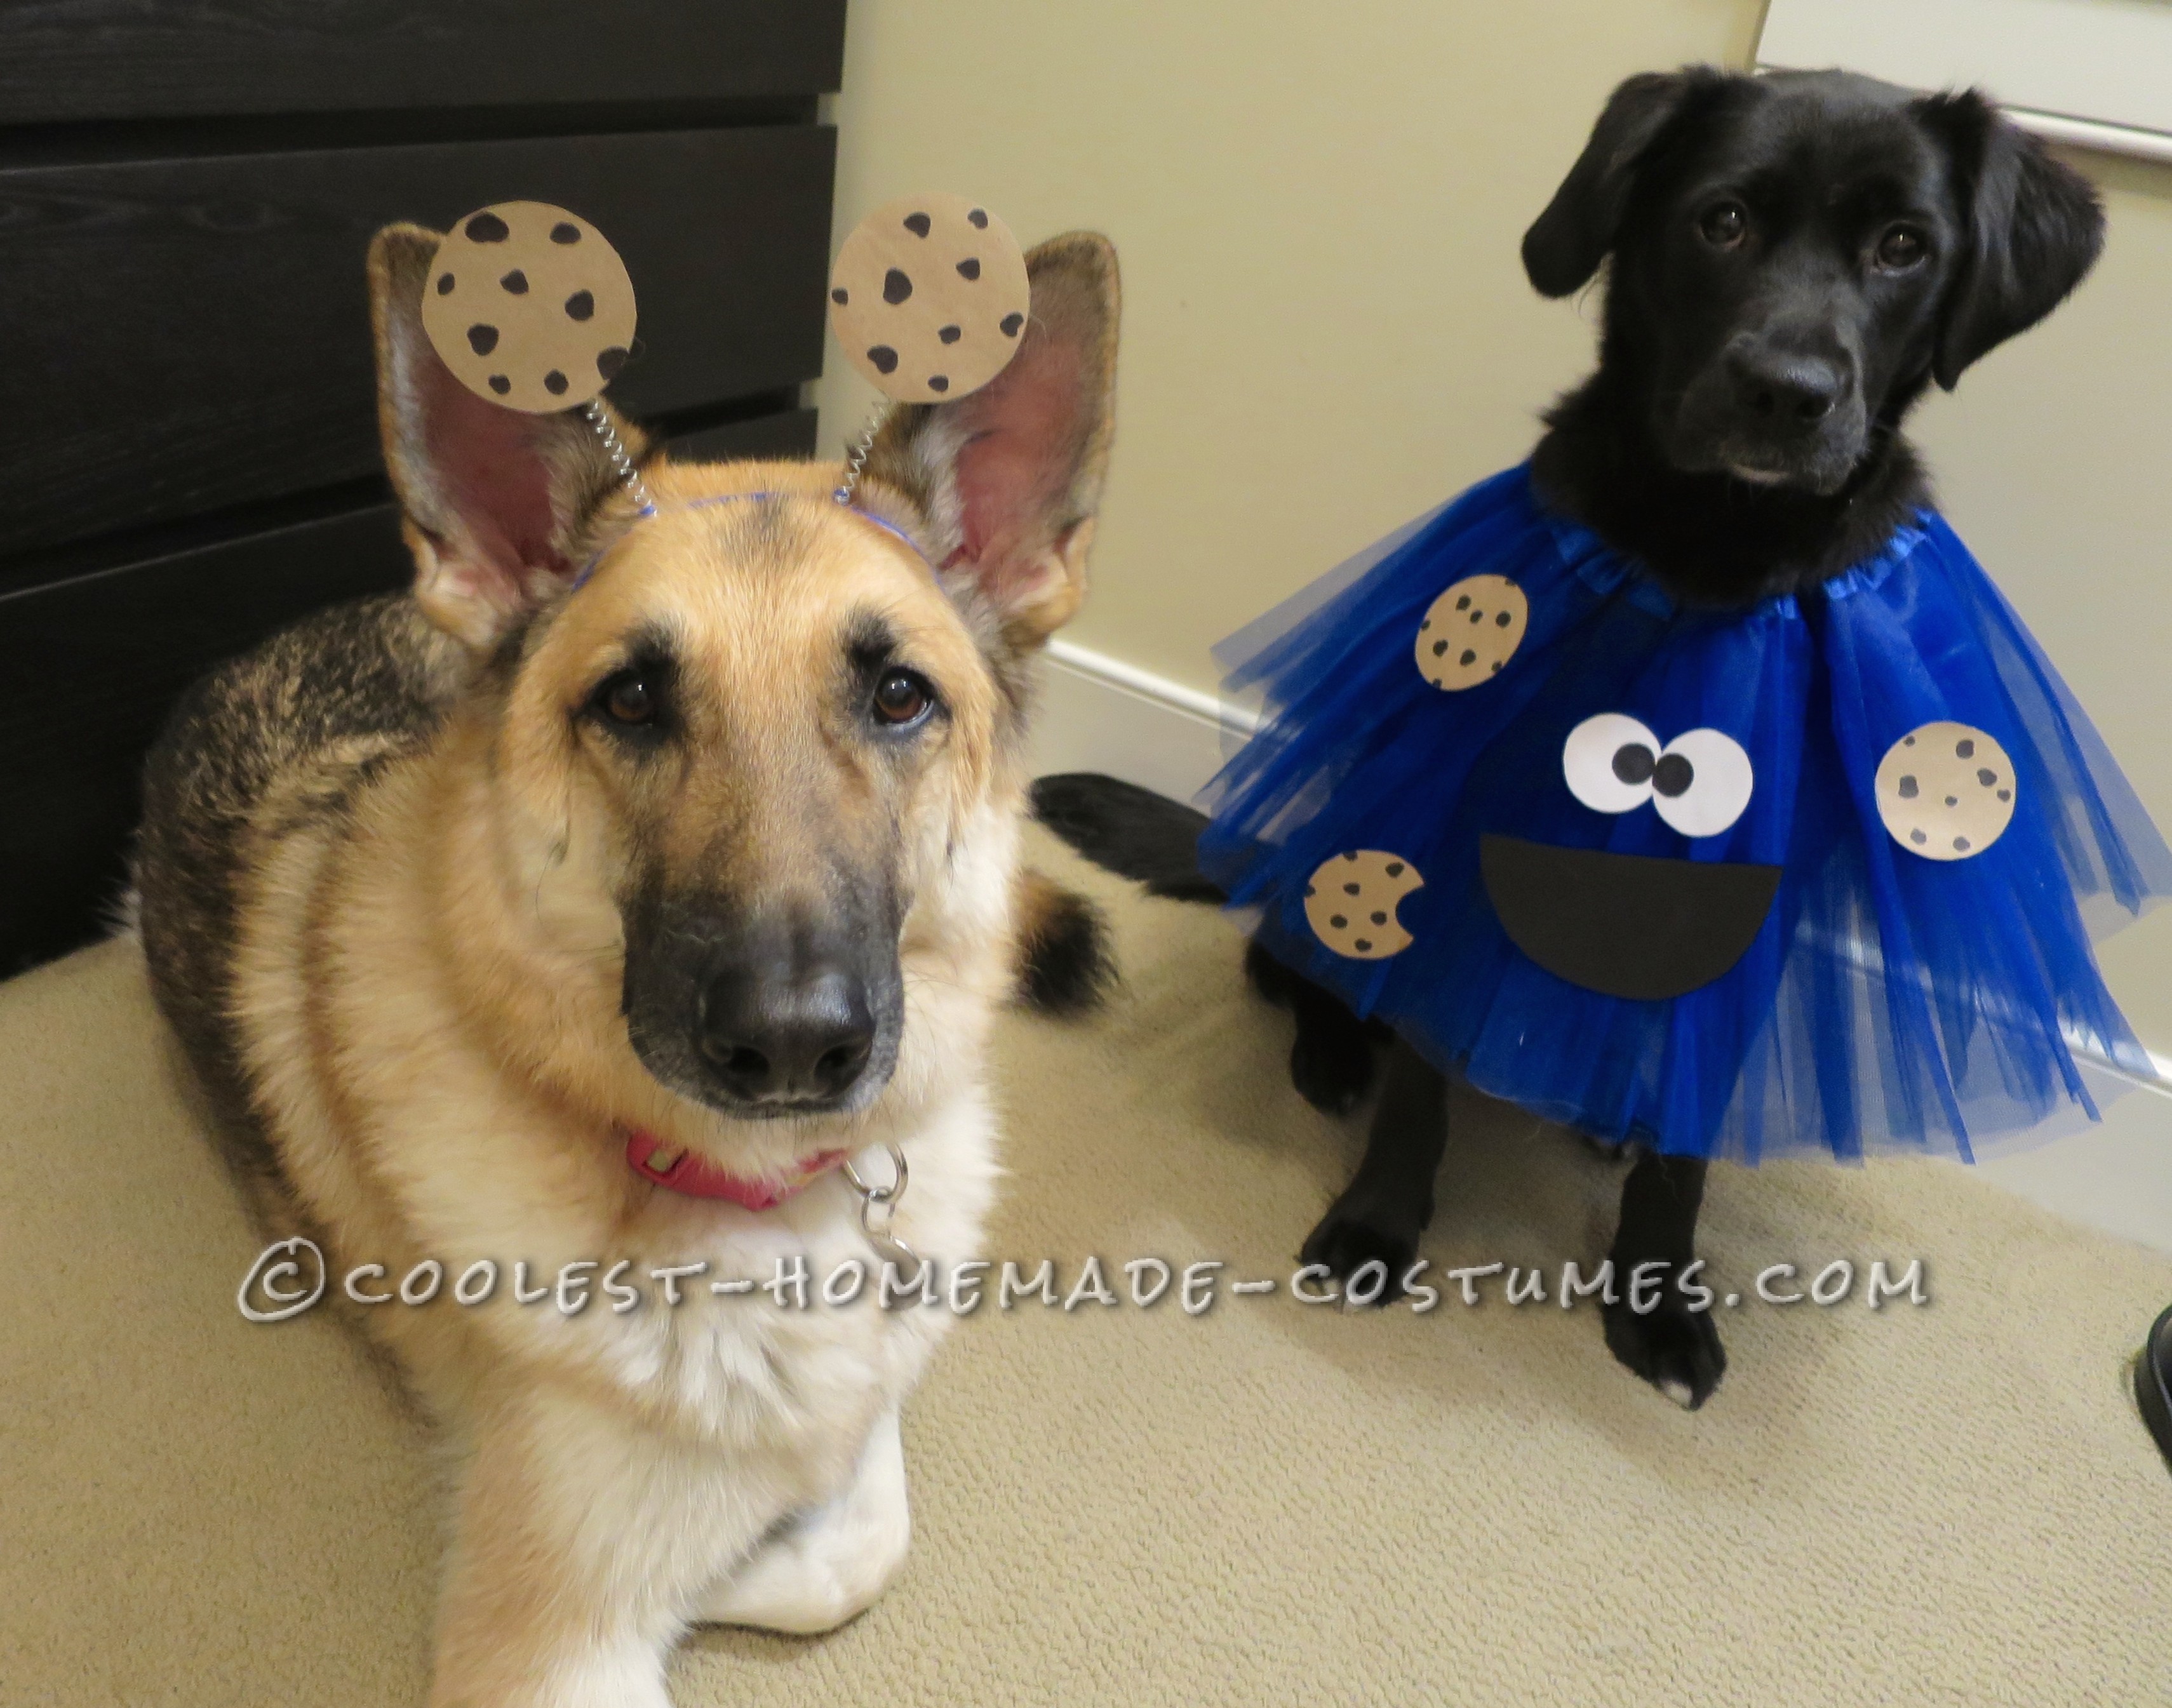 Deliciously Adorable Cookie Monster Costumes for Dogs